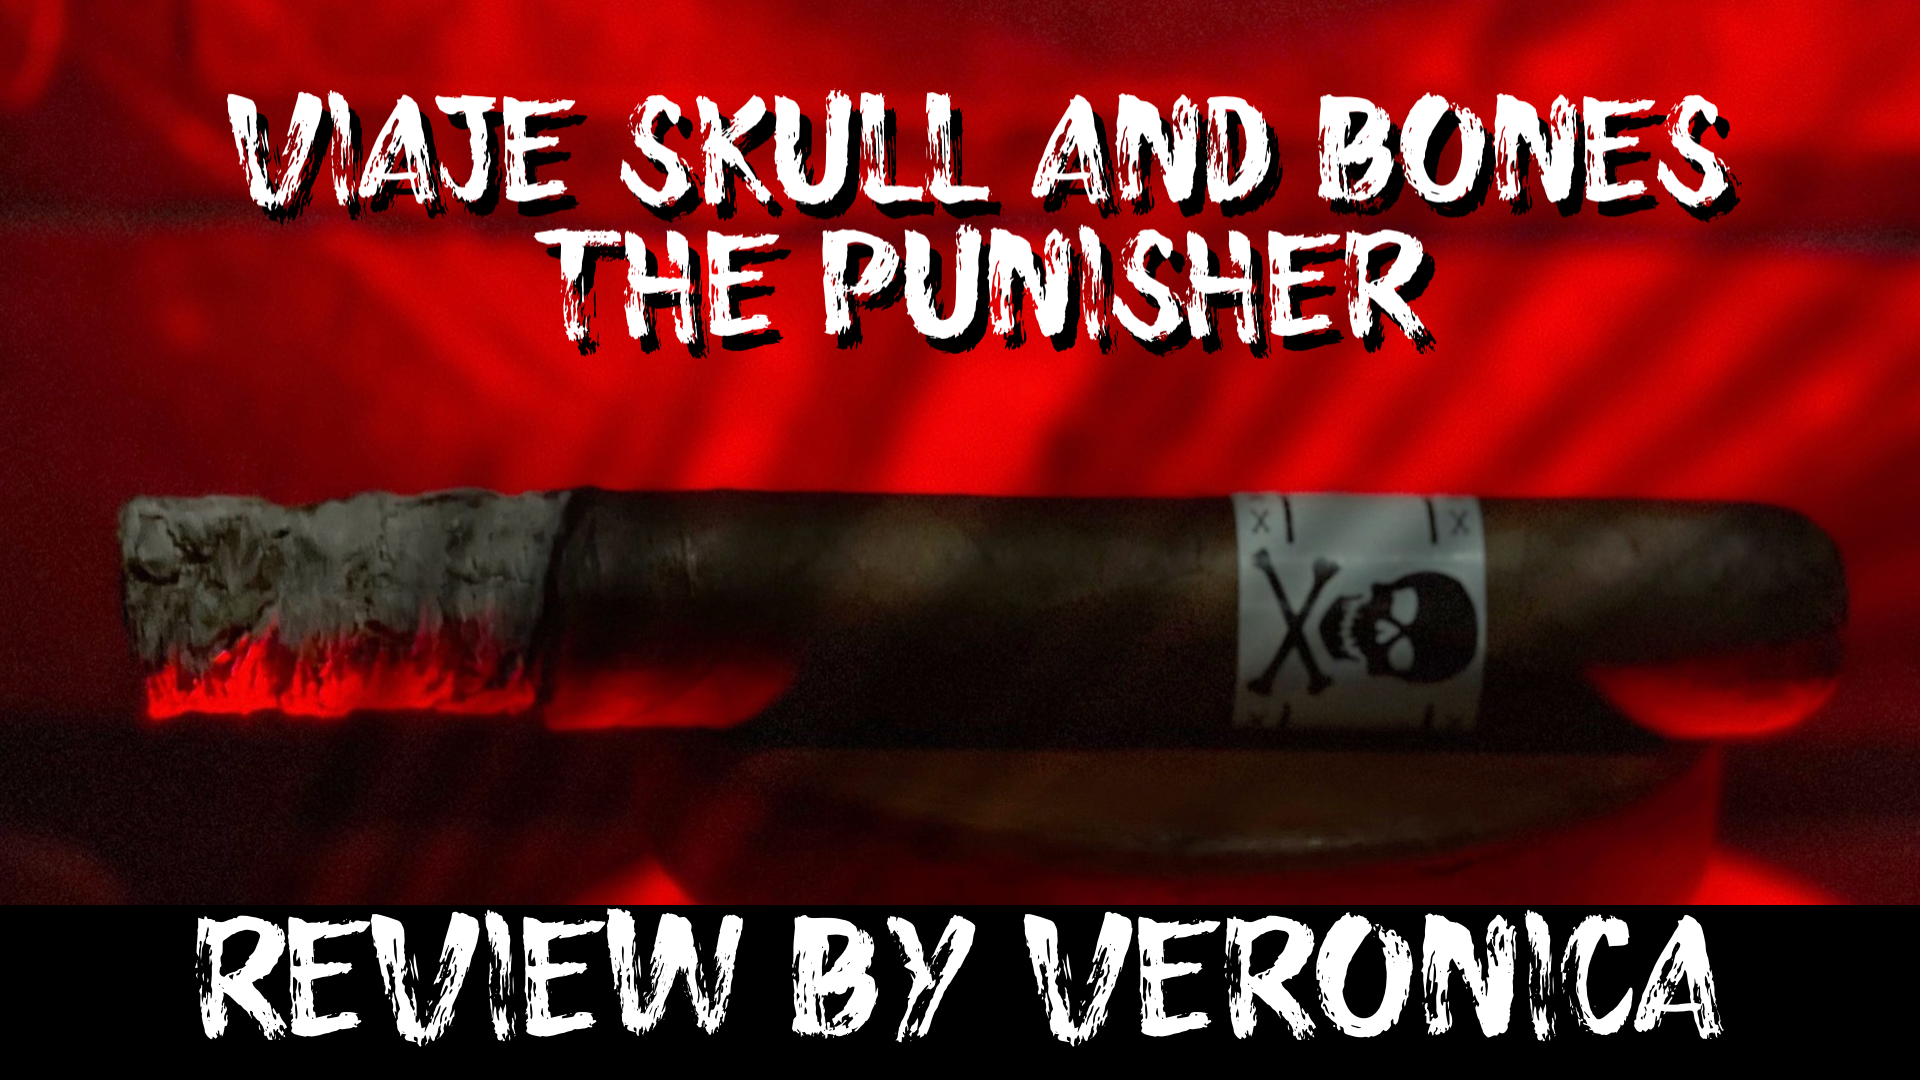 Viaje Skull and Bones The Punisher Review